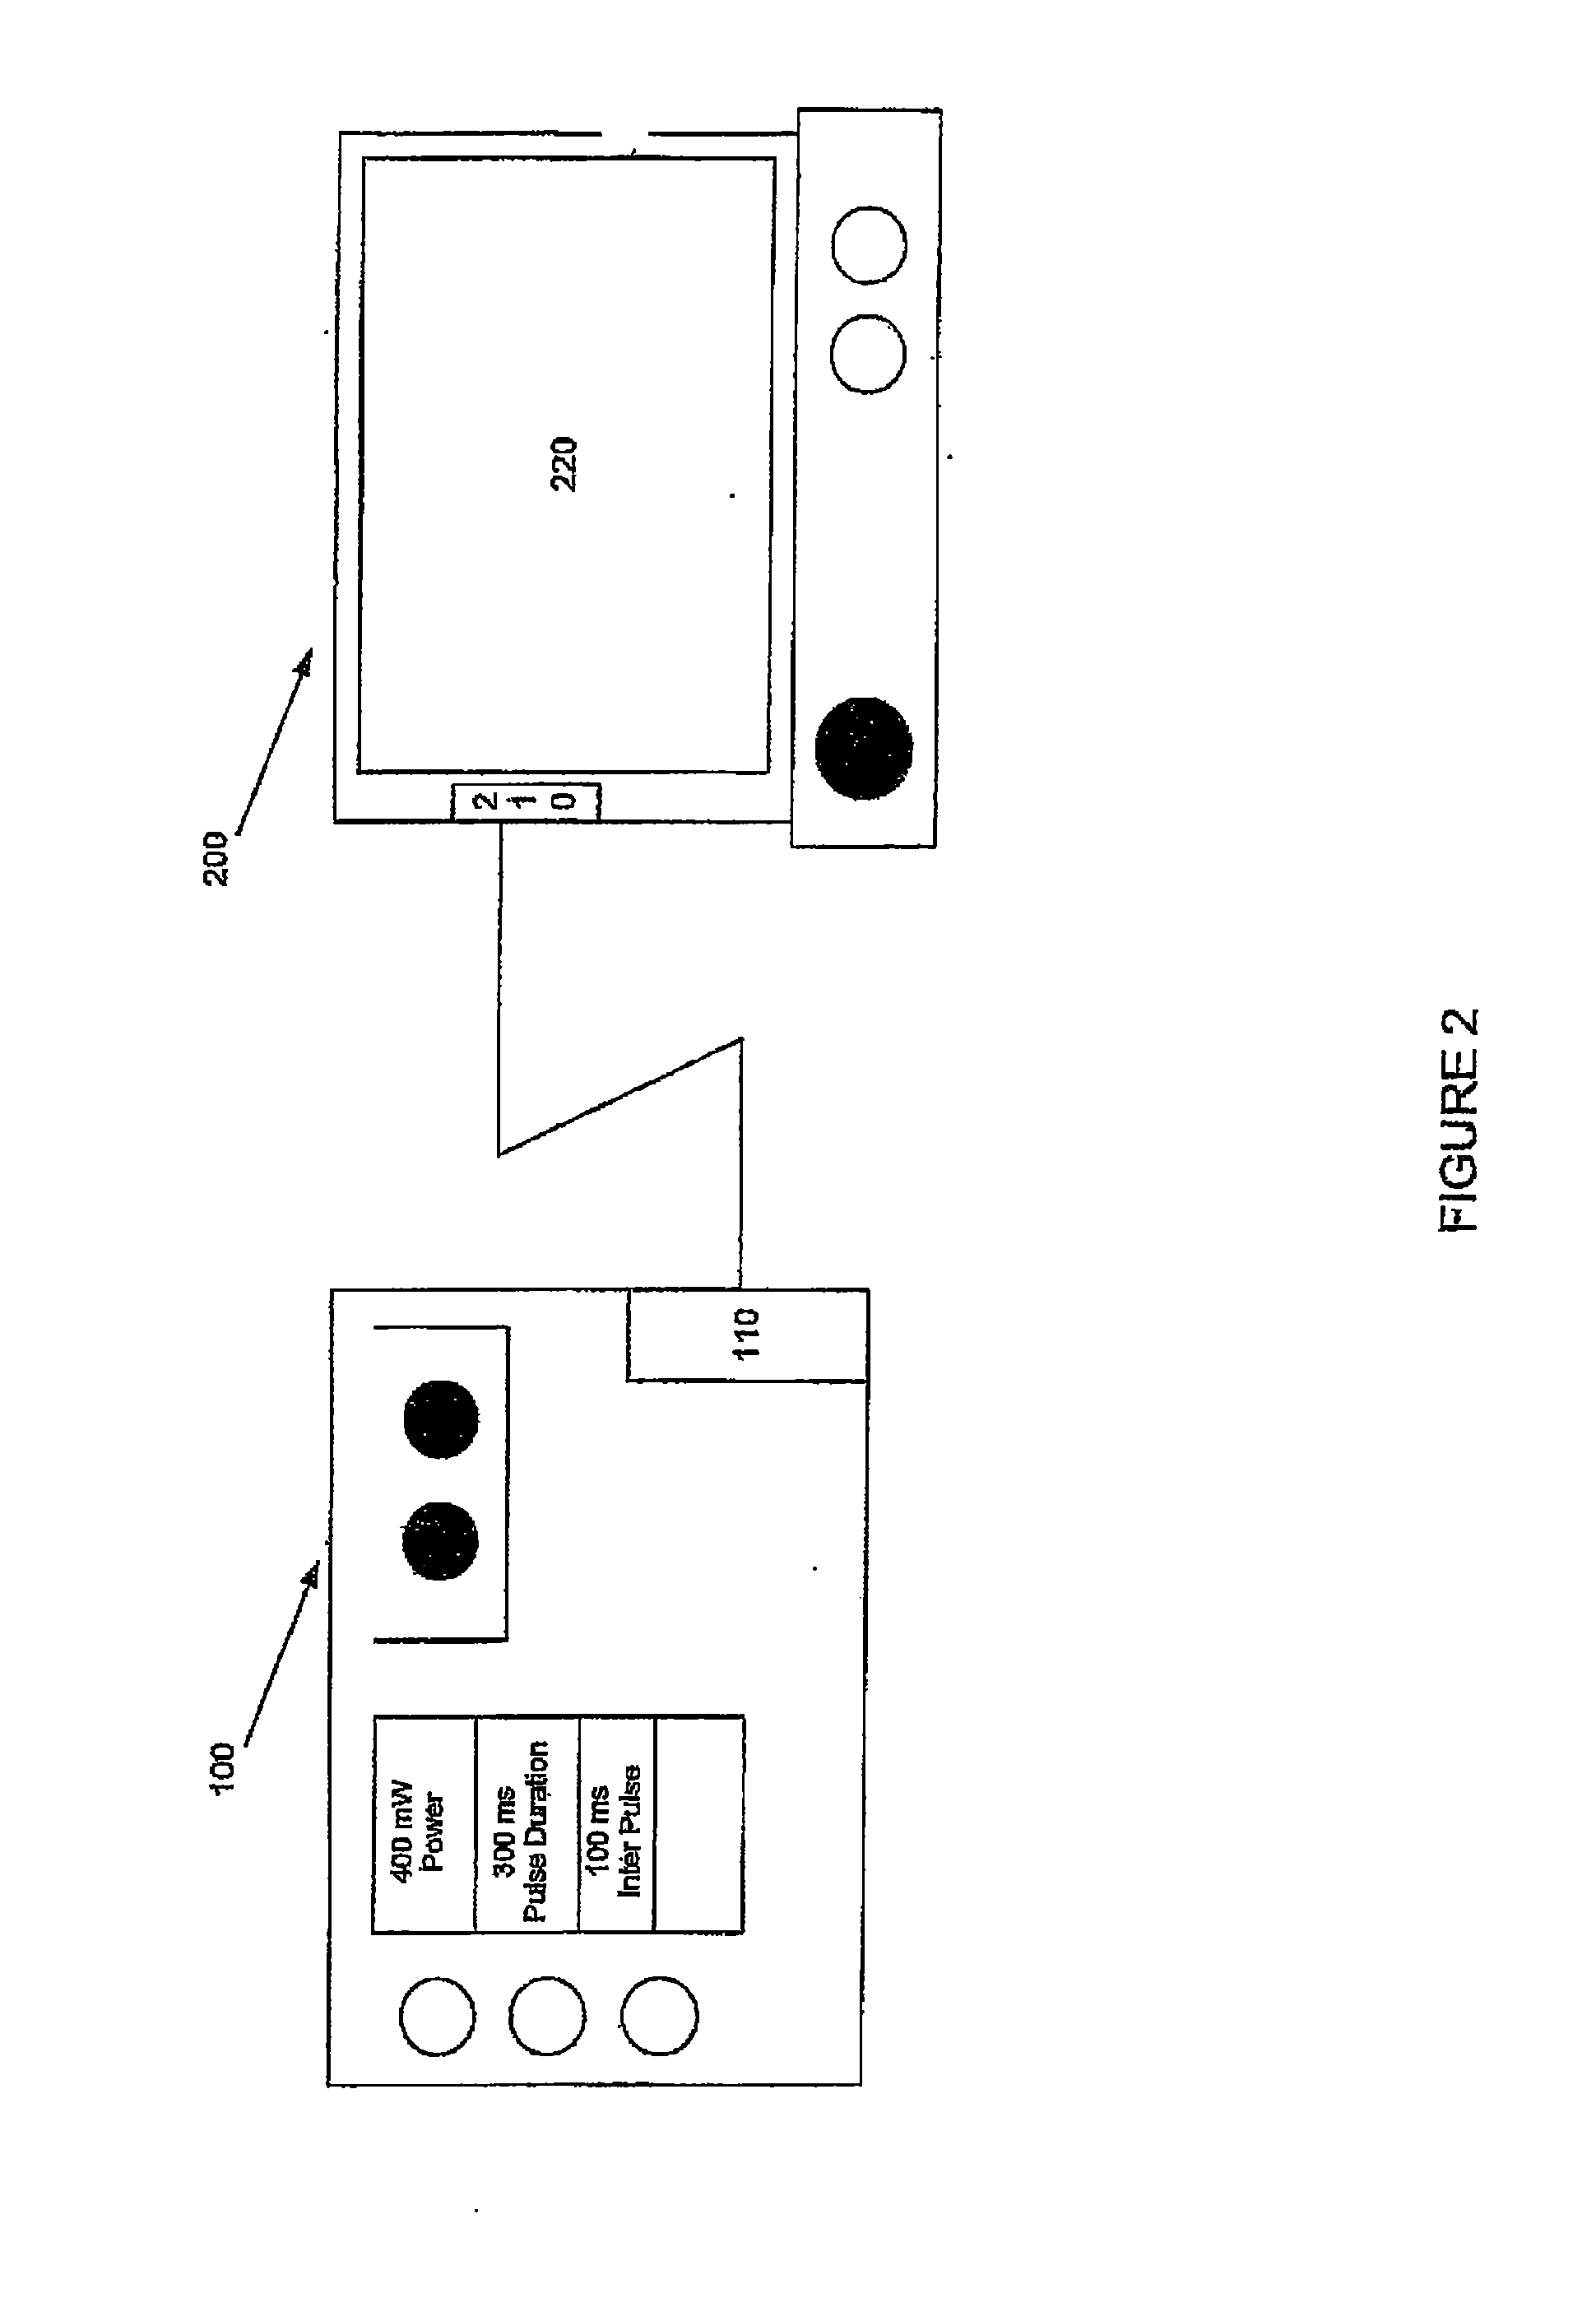 Method, System and Apparatus For Guaranteeing Laser Shut-Down Time